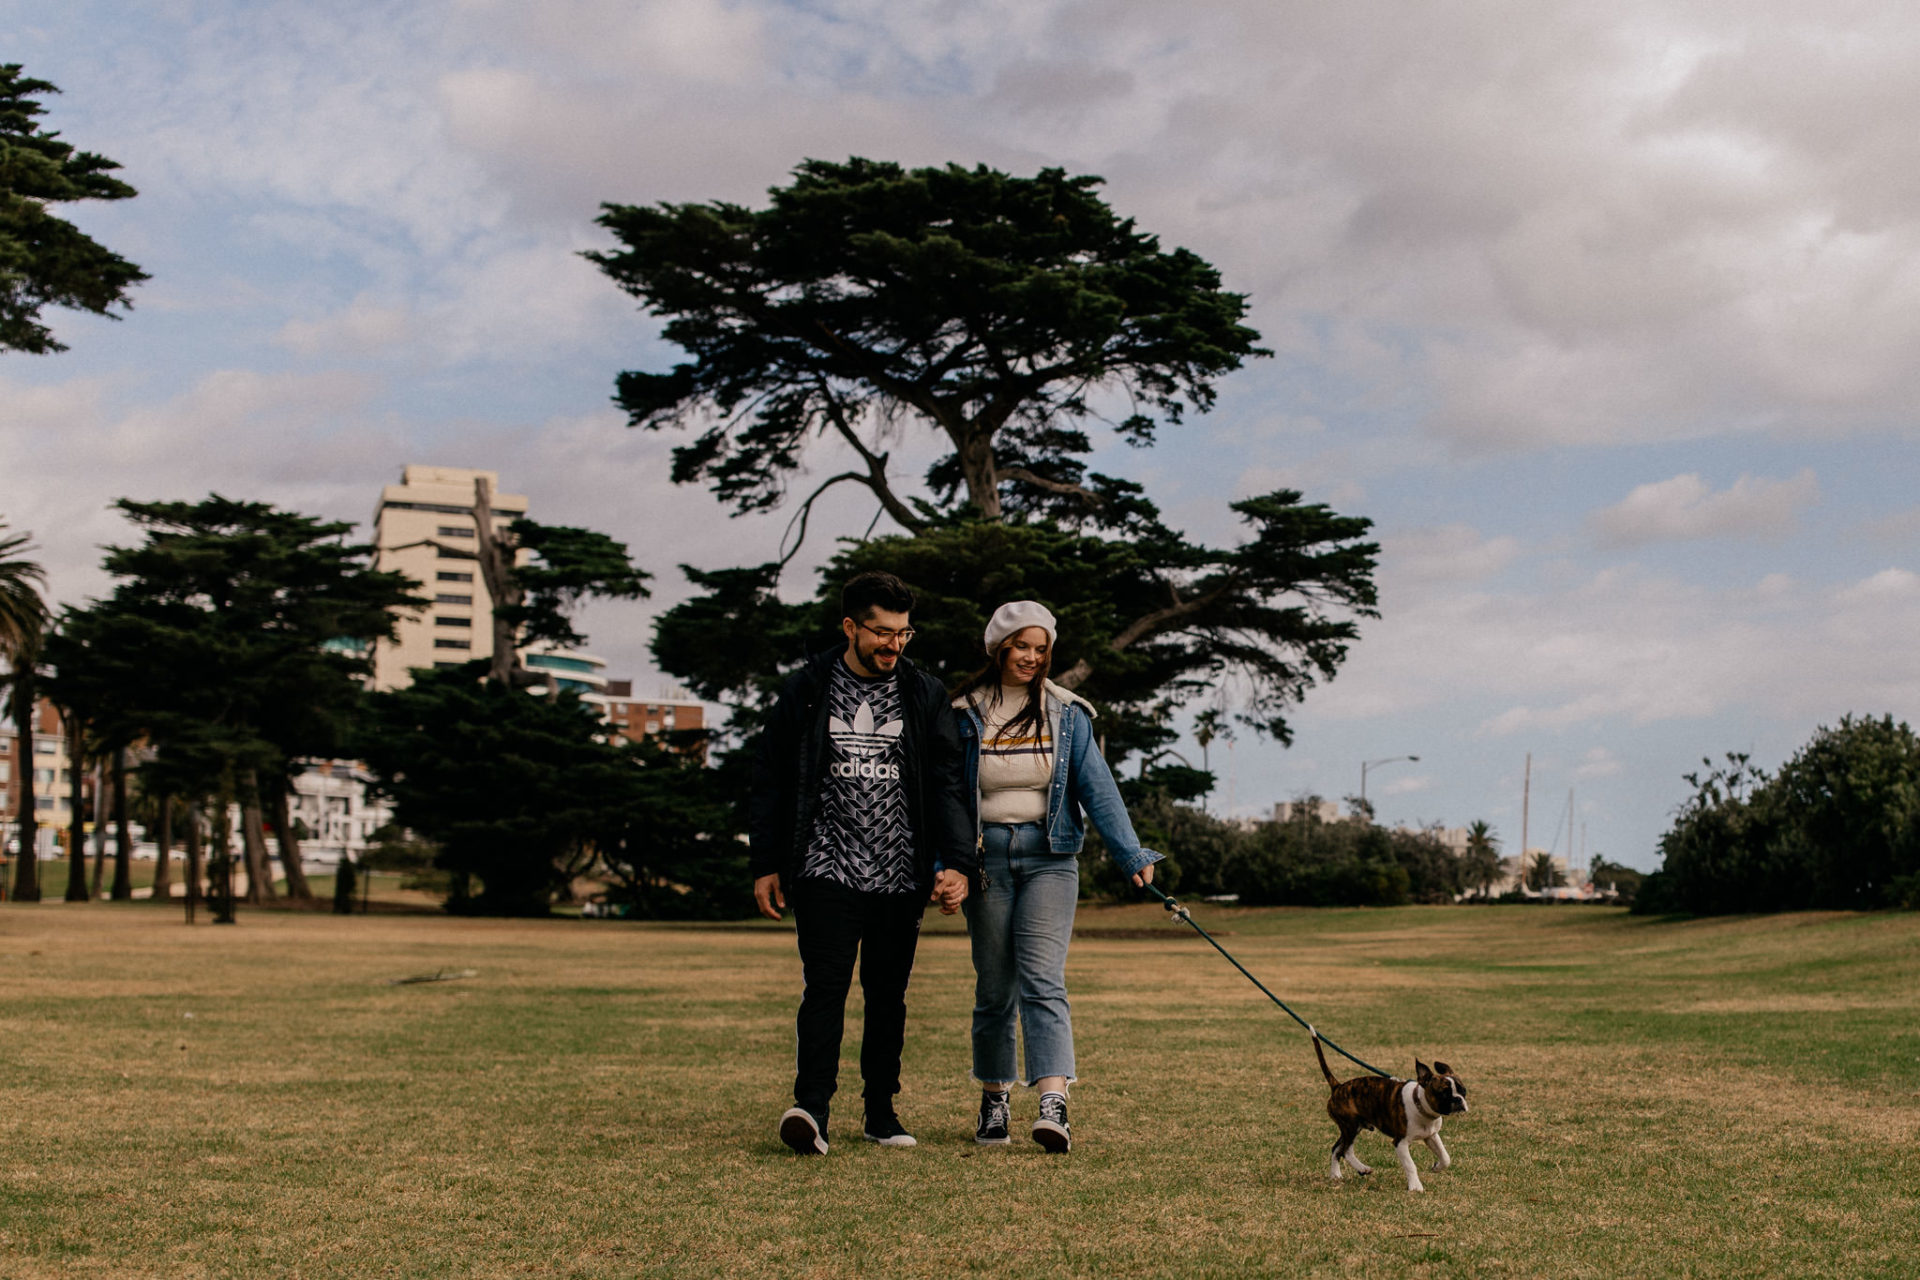 quirky st kilda photographyt-german wedding photographer melbourne-documentary candid unposed wedding photos-engagement session st klida beach-wedding with dog-chester the bochi